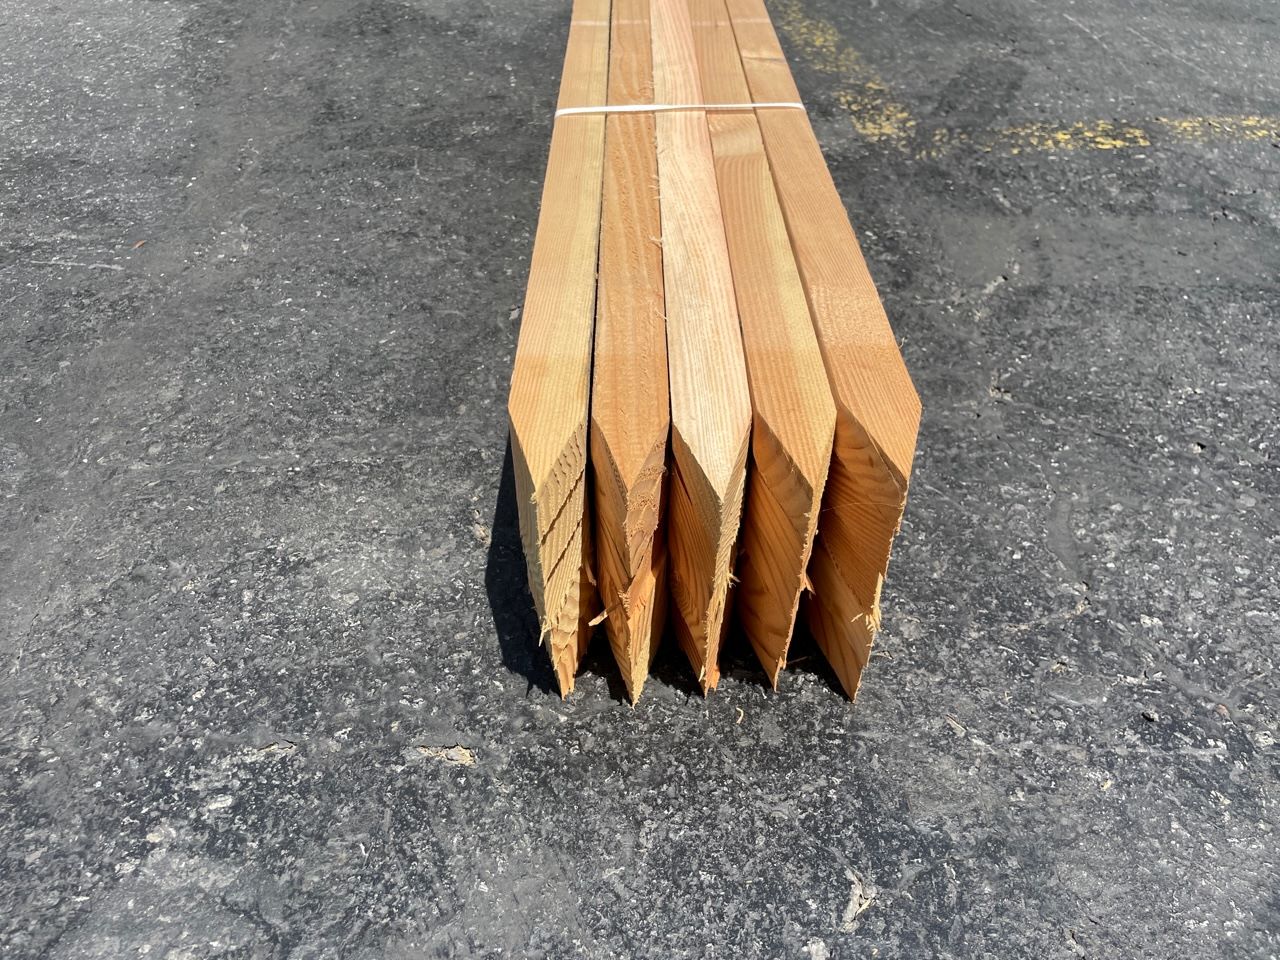 48 Wooden Grading Stakes - Survey Stakes, Concrete Forms - 1 x 2 x 48  (25 Bundle) - Made In The USA 525 pcs or 1/2 pallet - $2.11/stake /